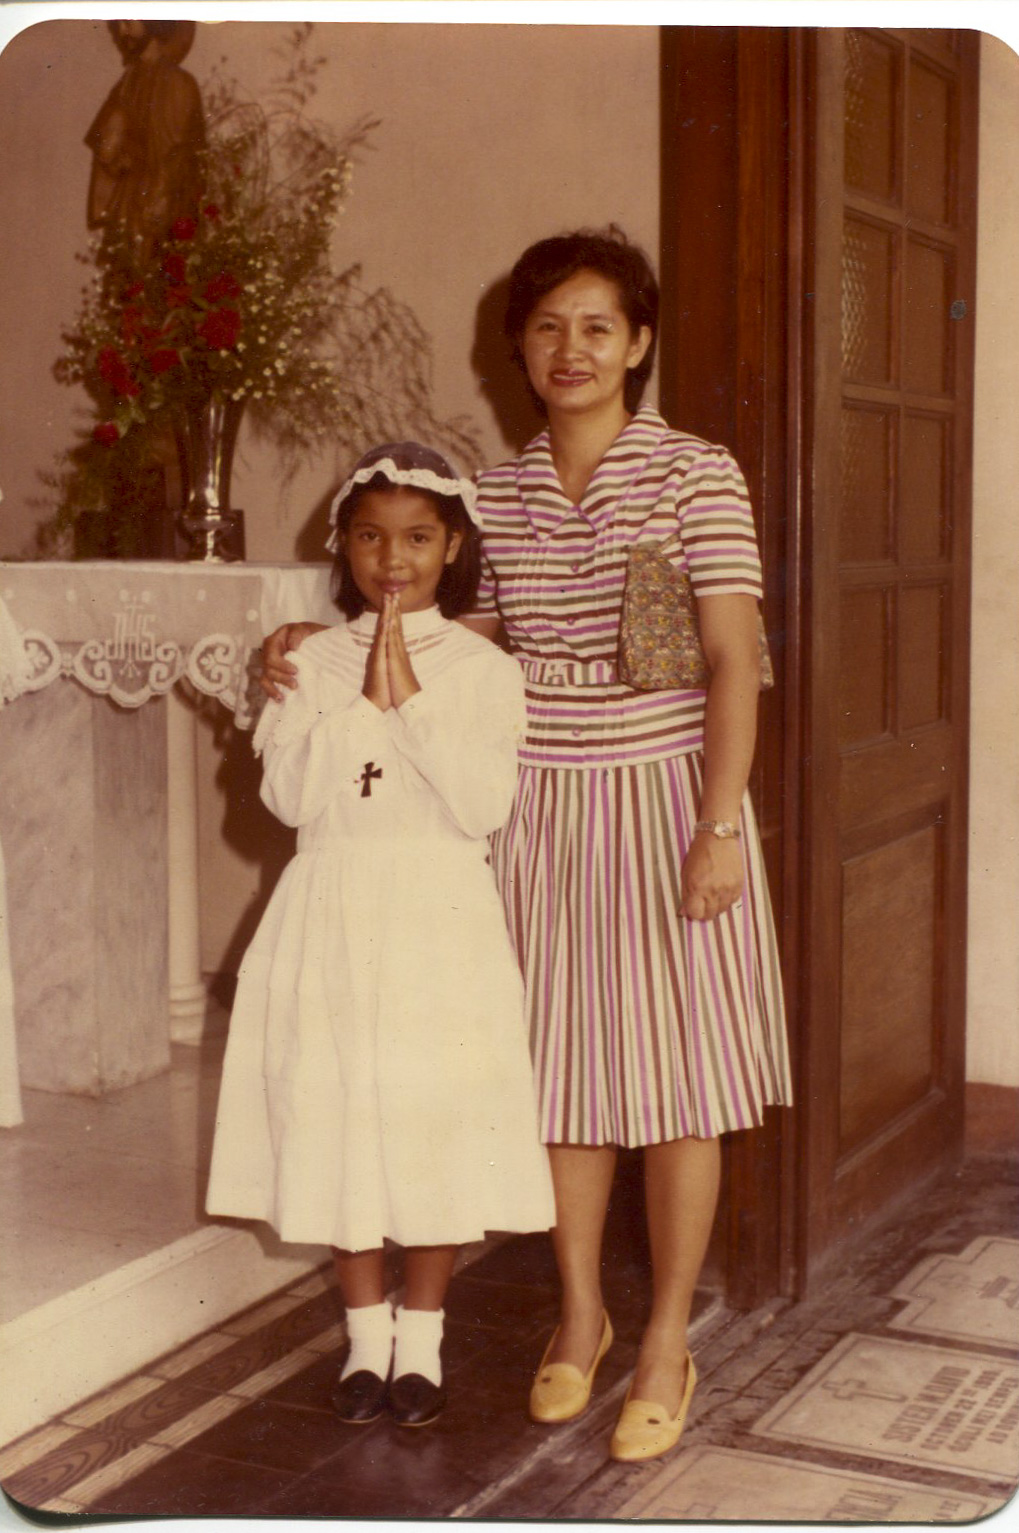 Photo of Escarilla-Carnate and mother, 1982
Escarilla-Carnate said, “Taken in February or March 1982 by a professional photographer when I was in 2nd grade at Assumption School in Iloilo City. It was in a family album. Pictured are my mother and me. My catholic faith is important and I continue to practice Catholicism here in the USA. My son has already had his first communion.” 

Any views, findings, conclusions, or recommendations expressed in this story do not necessarily represent those of the National Endowment for the Humanities. (c) Field Museum of Natural History - CC BY-NC 4.0